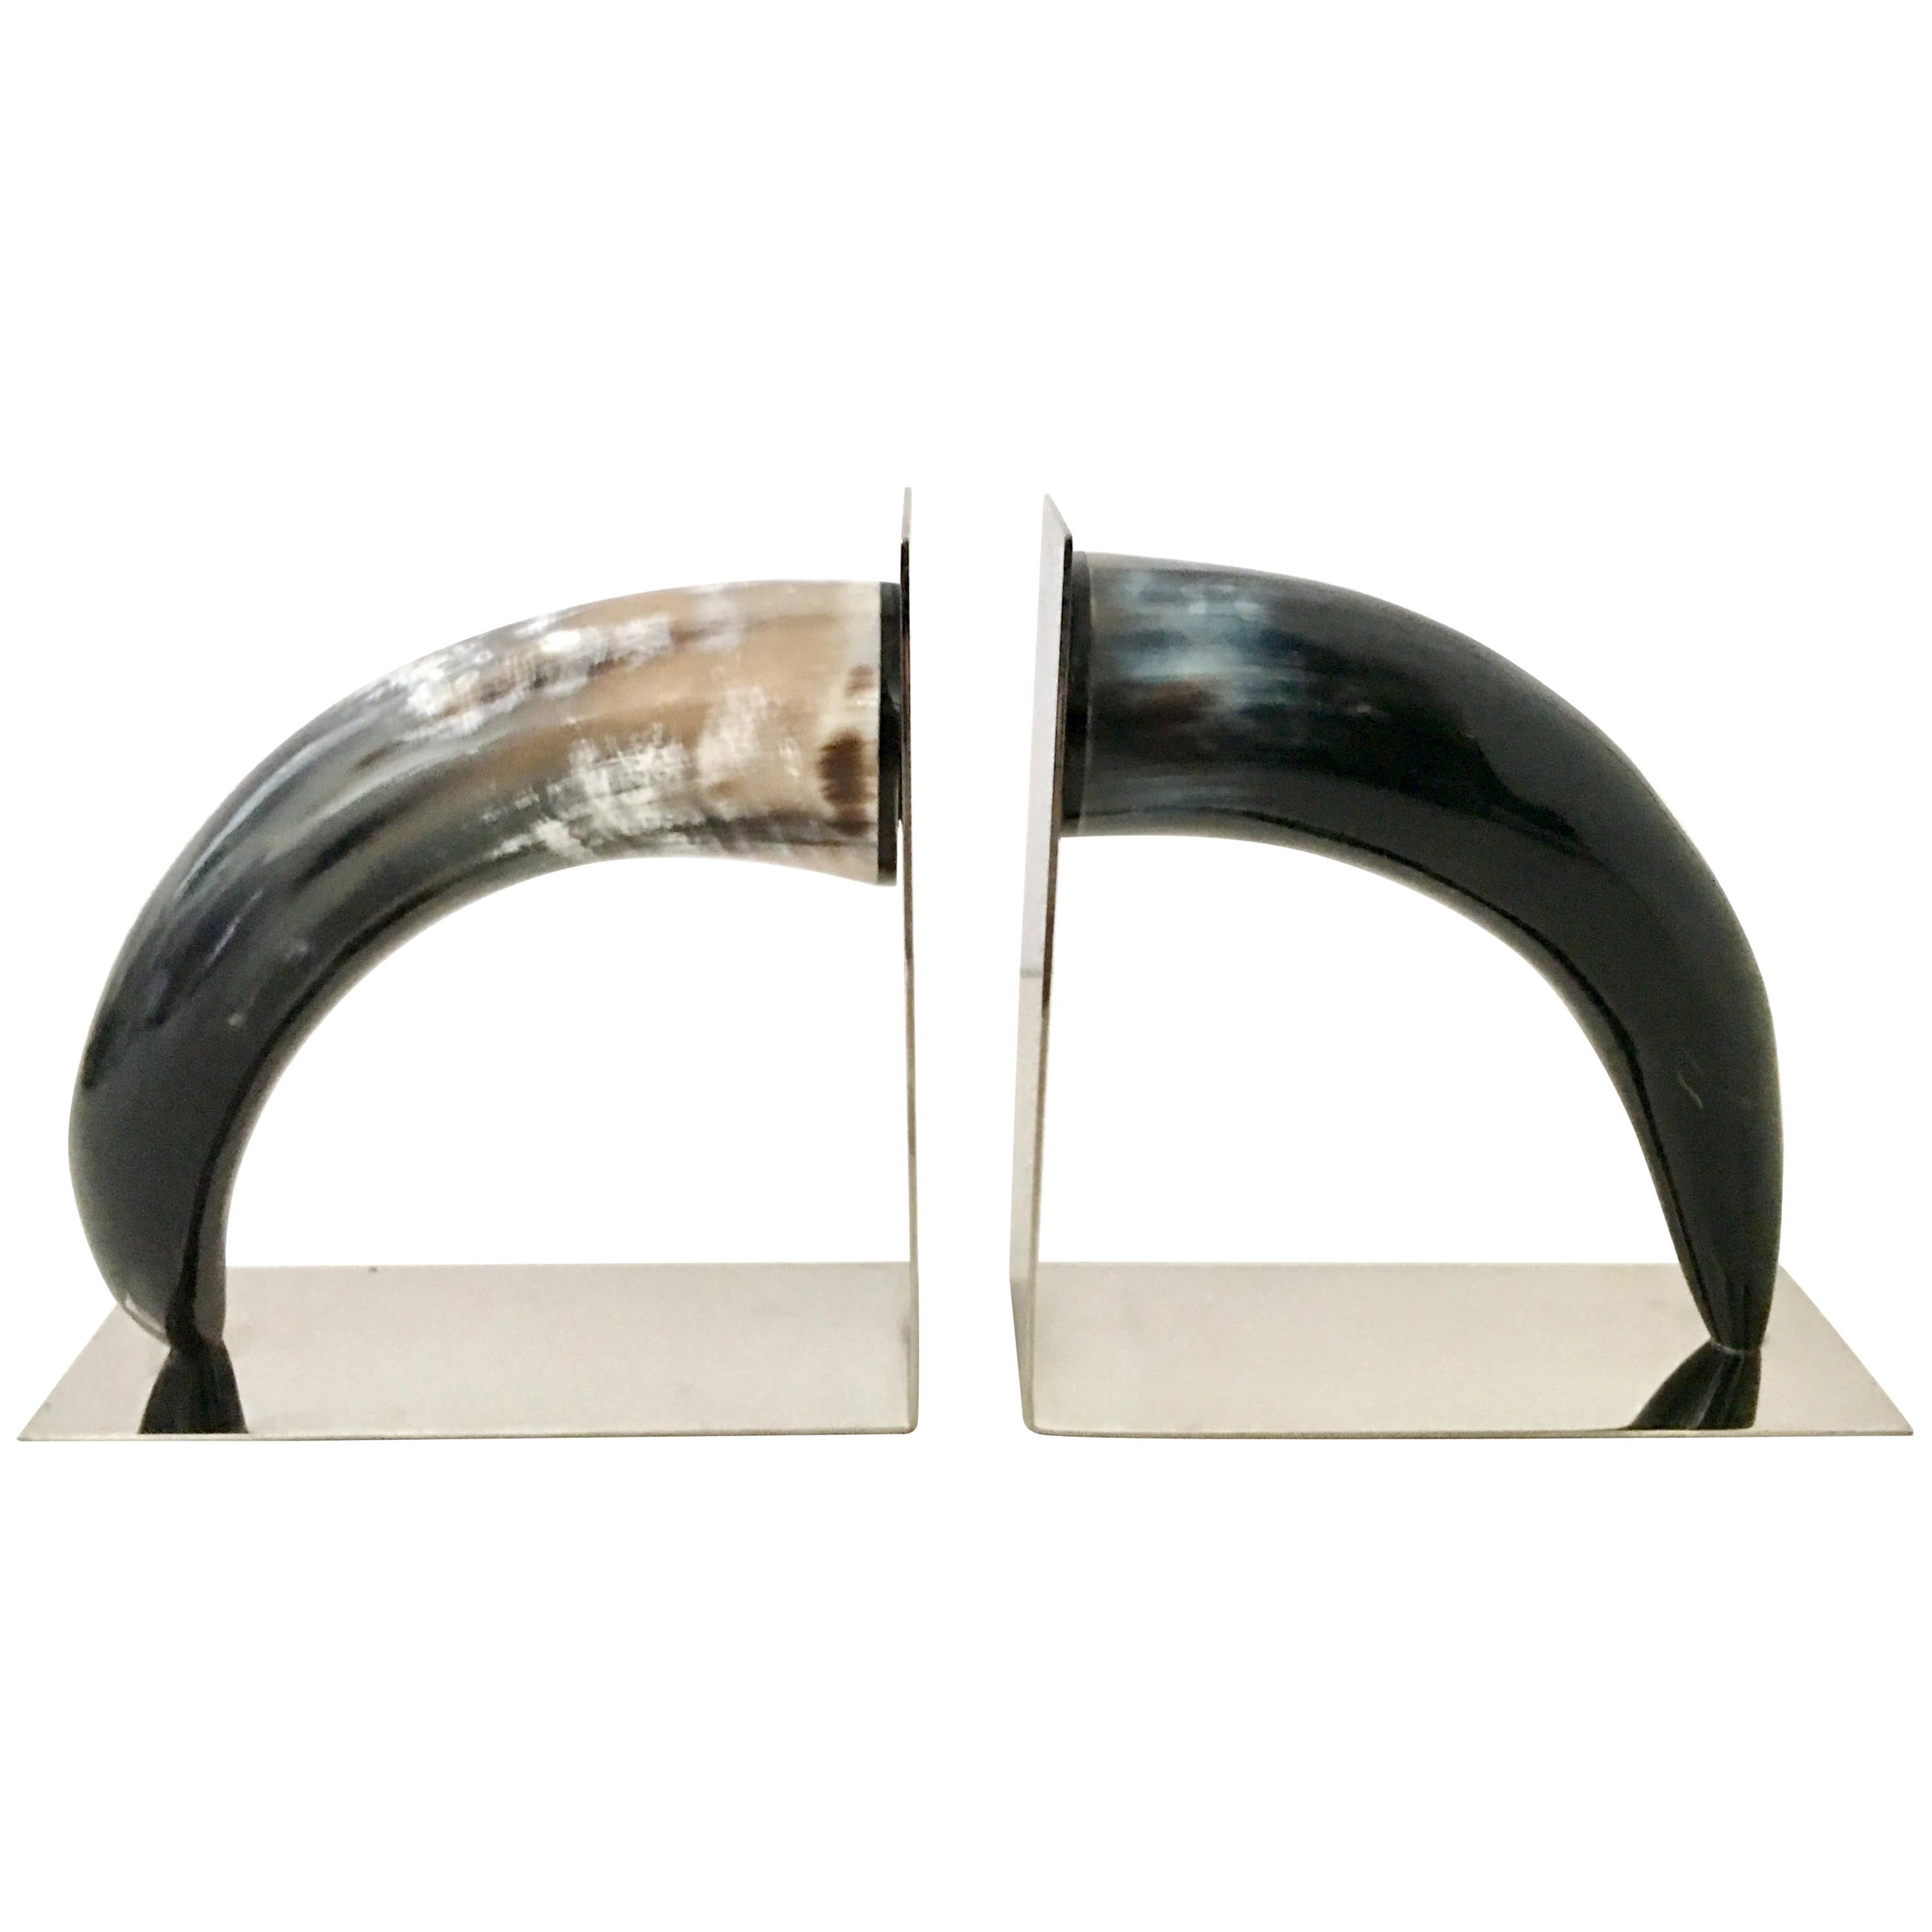 21st Century Contemporary Pair of Chrome Mounted Horn Bookend Sculptures For Sale